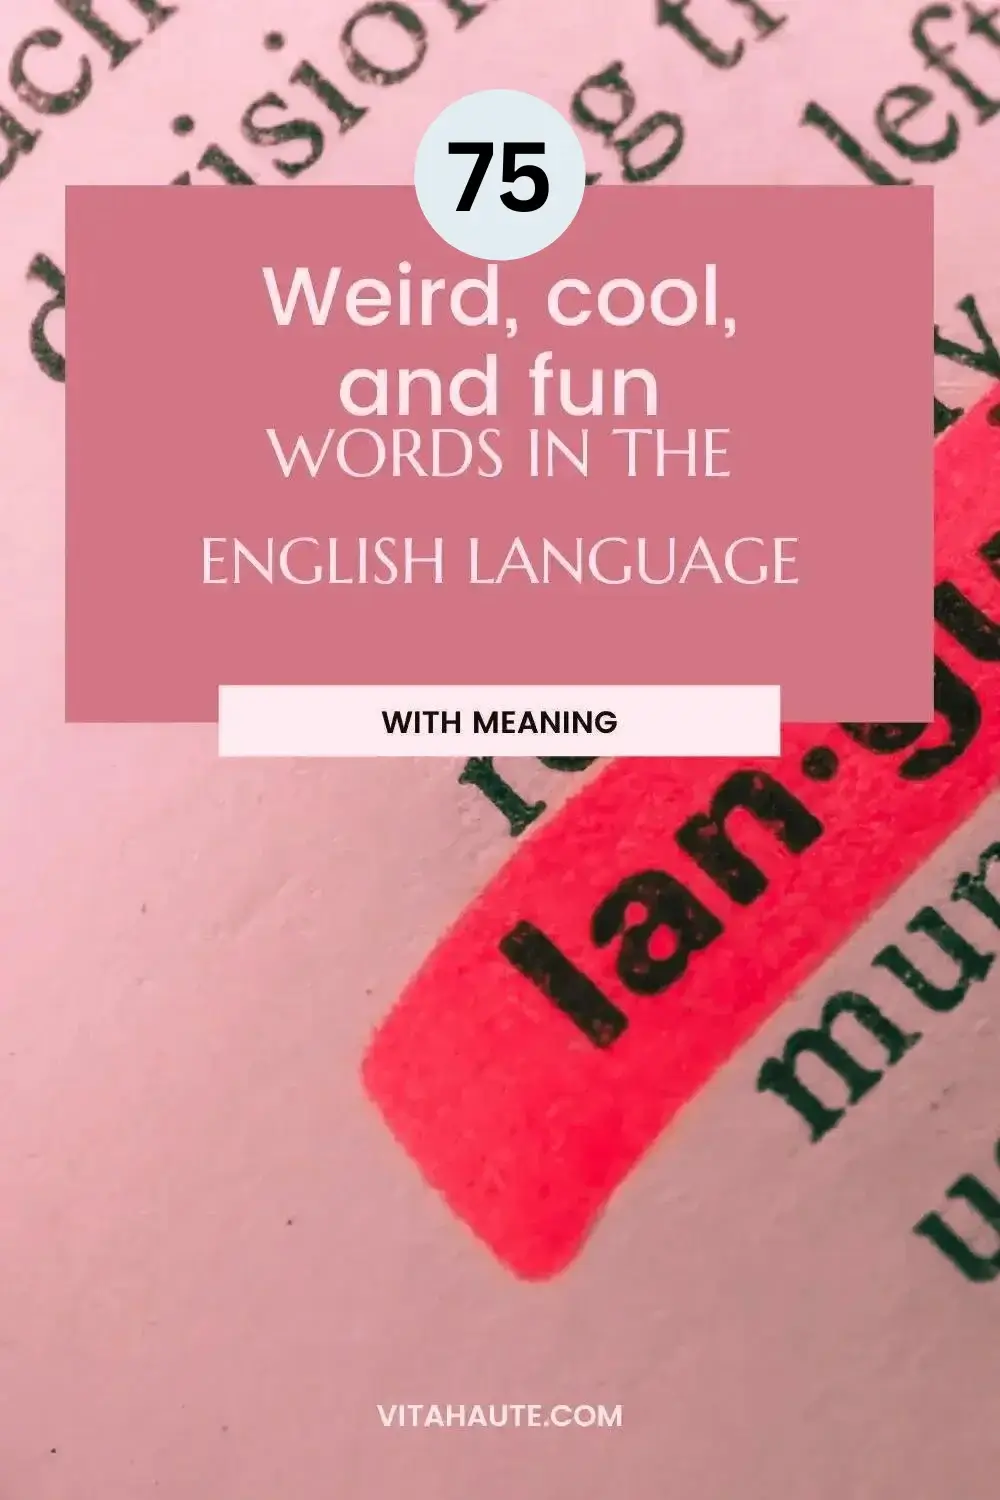 A list of cool and interesting words in the English language